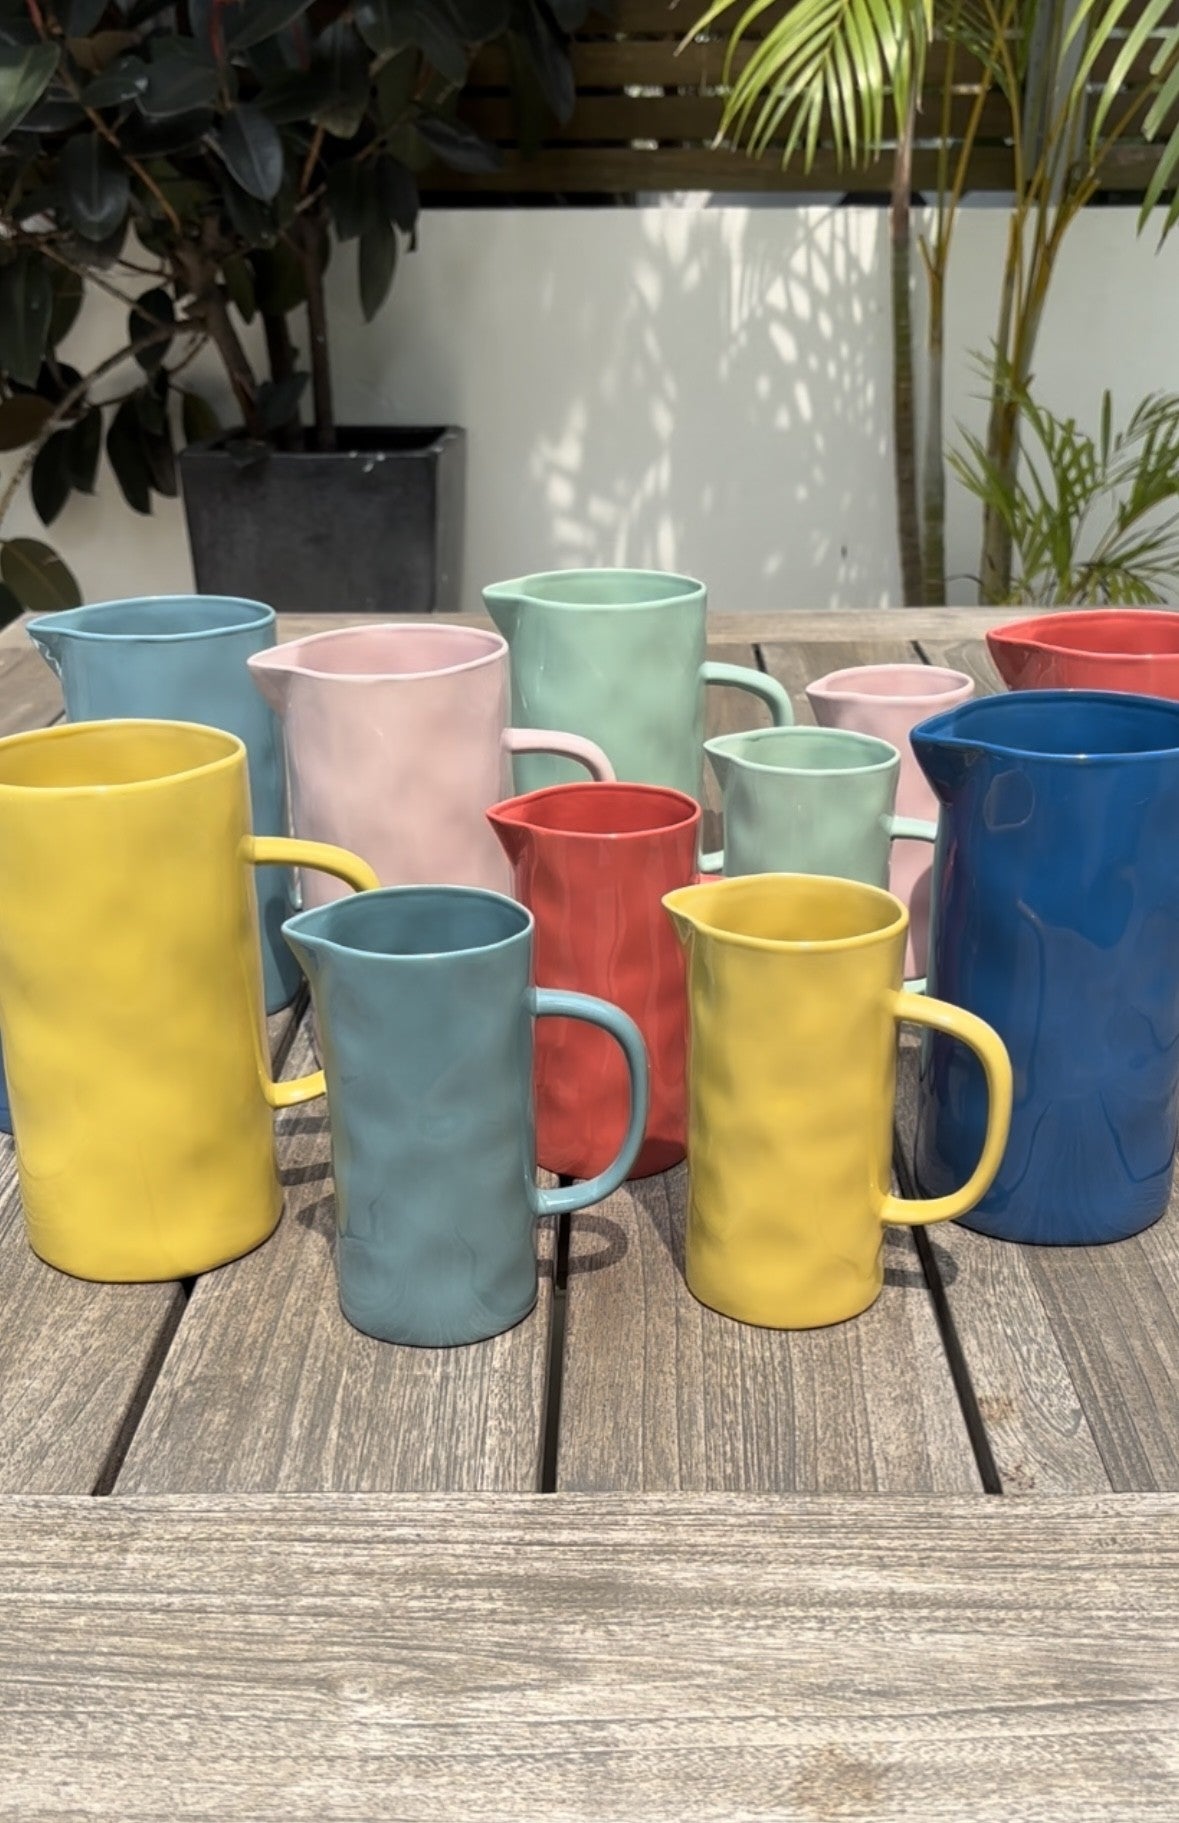 A collection of colourful hand-painted jugs